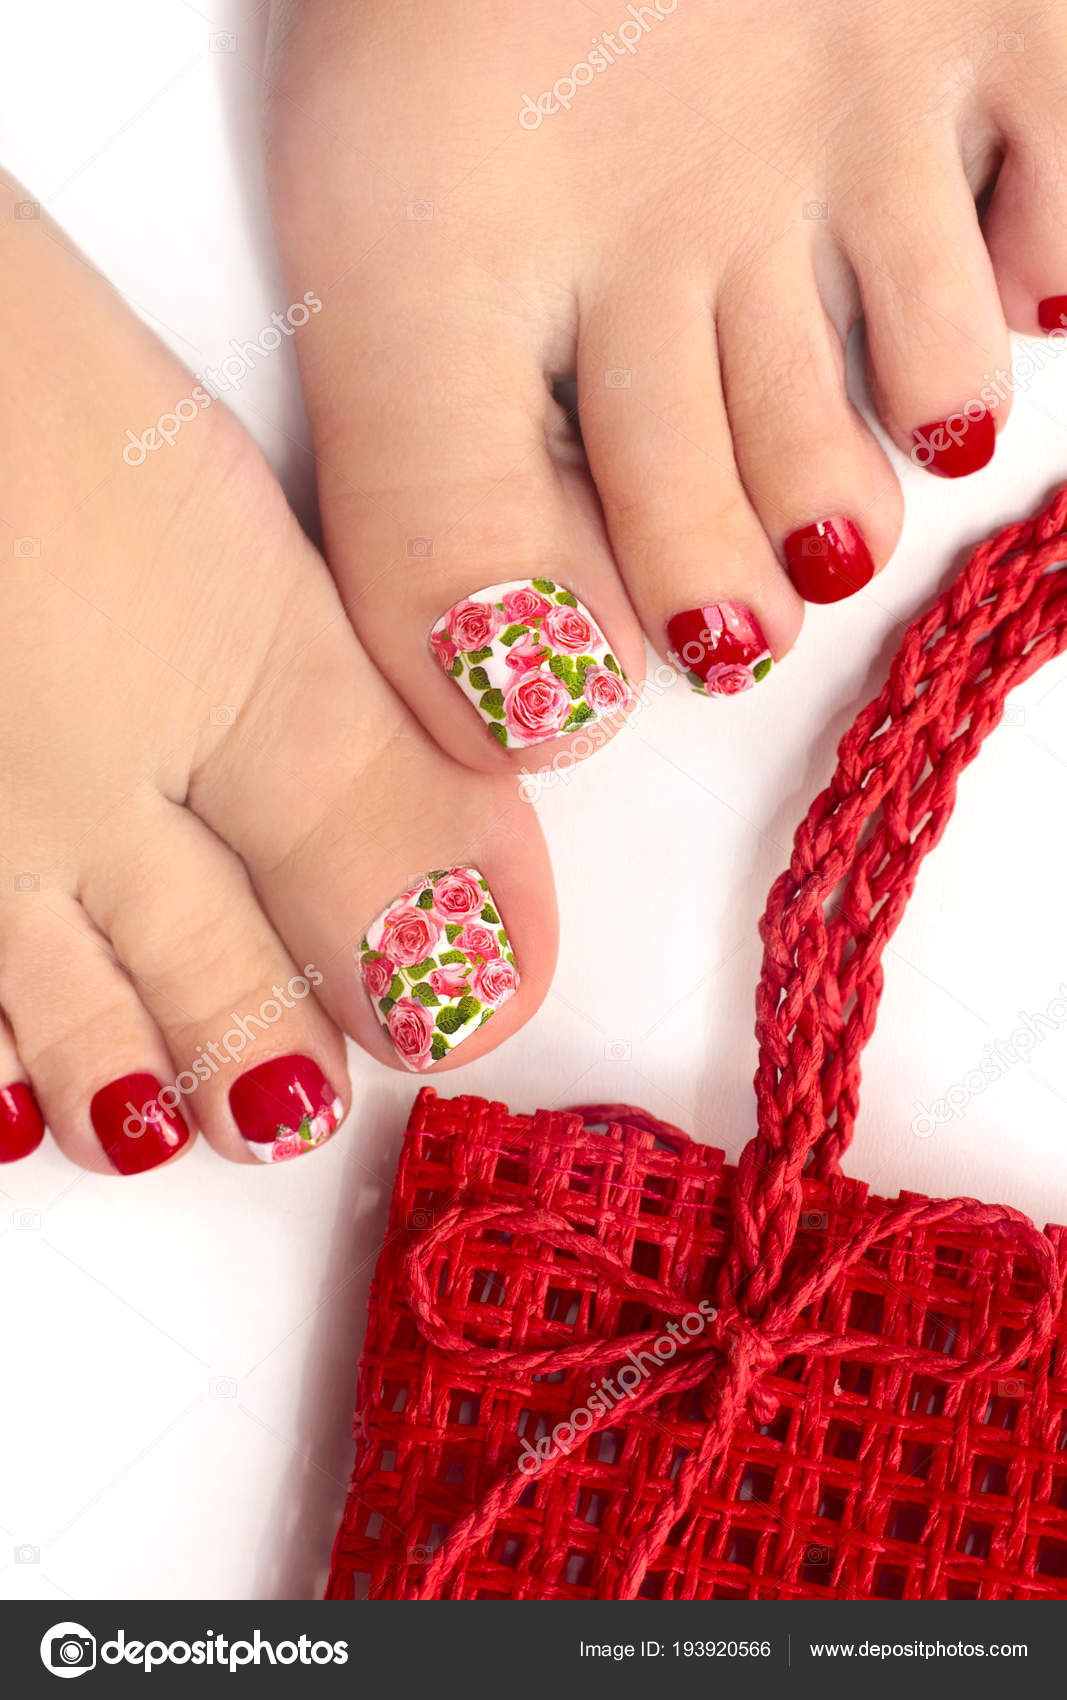 Nail Art & Design ideas - Step into spring with these stunning toe nail  ideas From delicate florals to bold botanicals theres a design for every  style. Let your toes bloom with